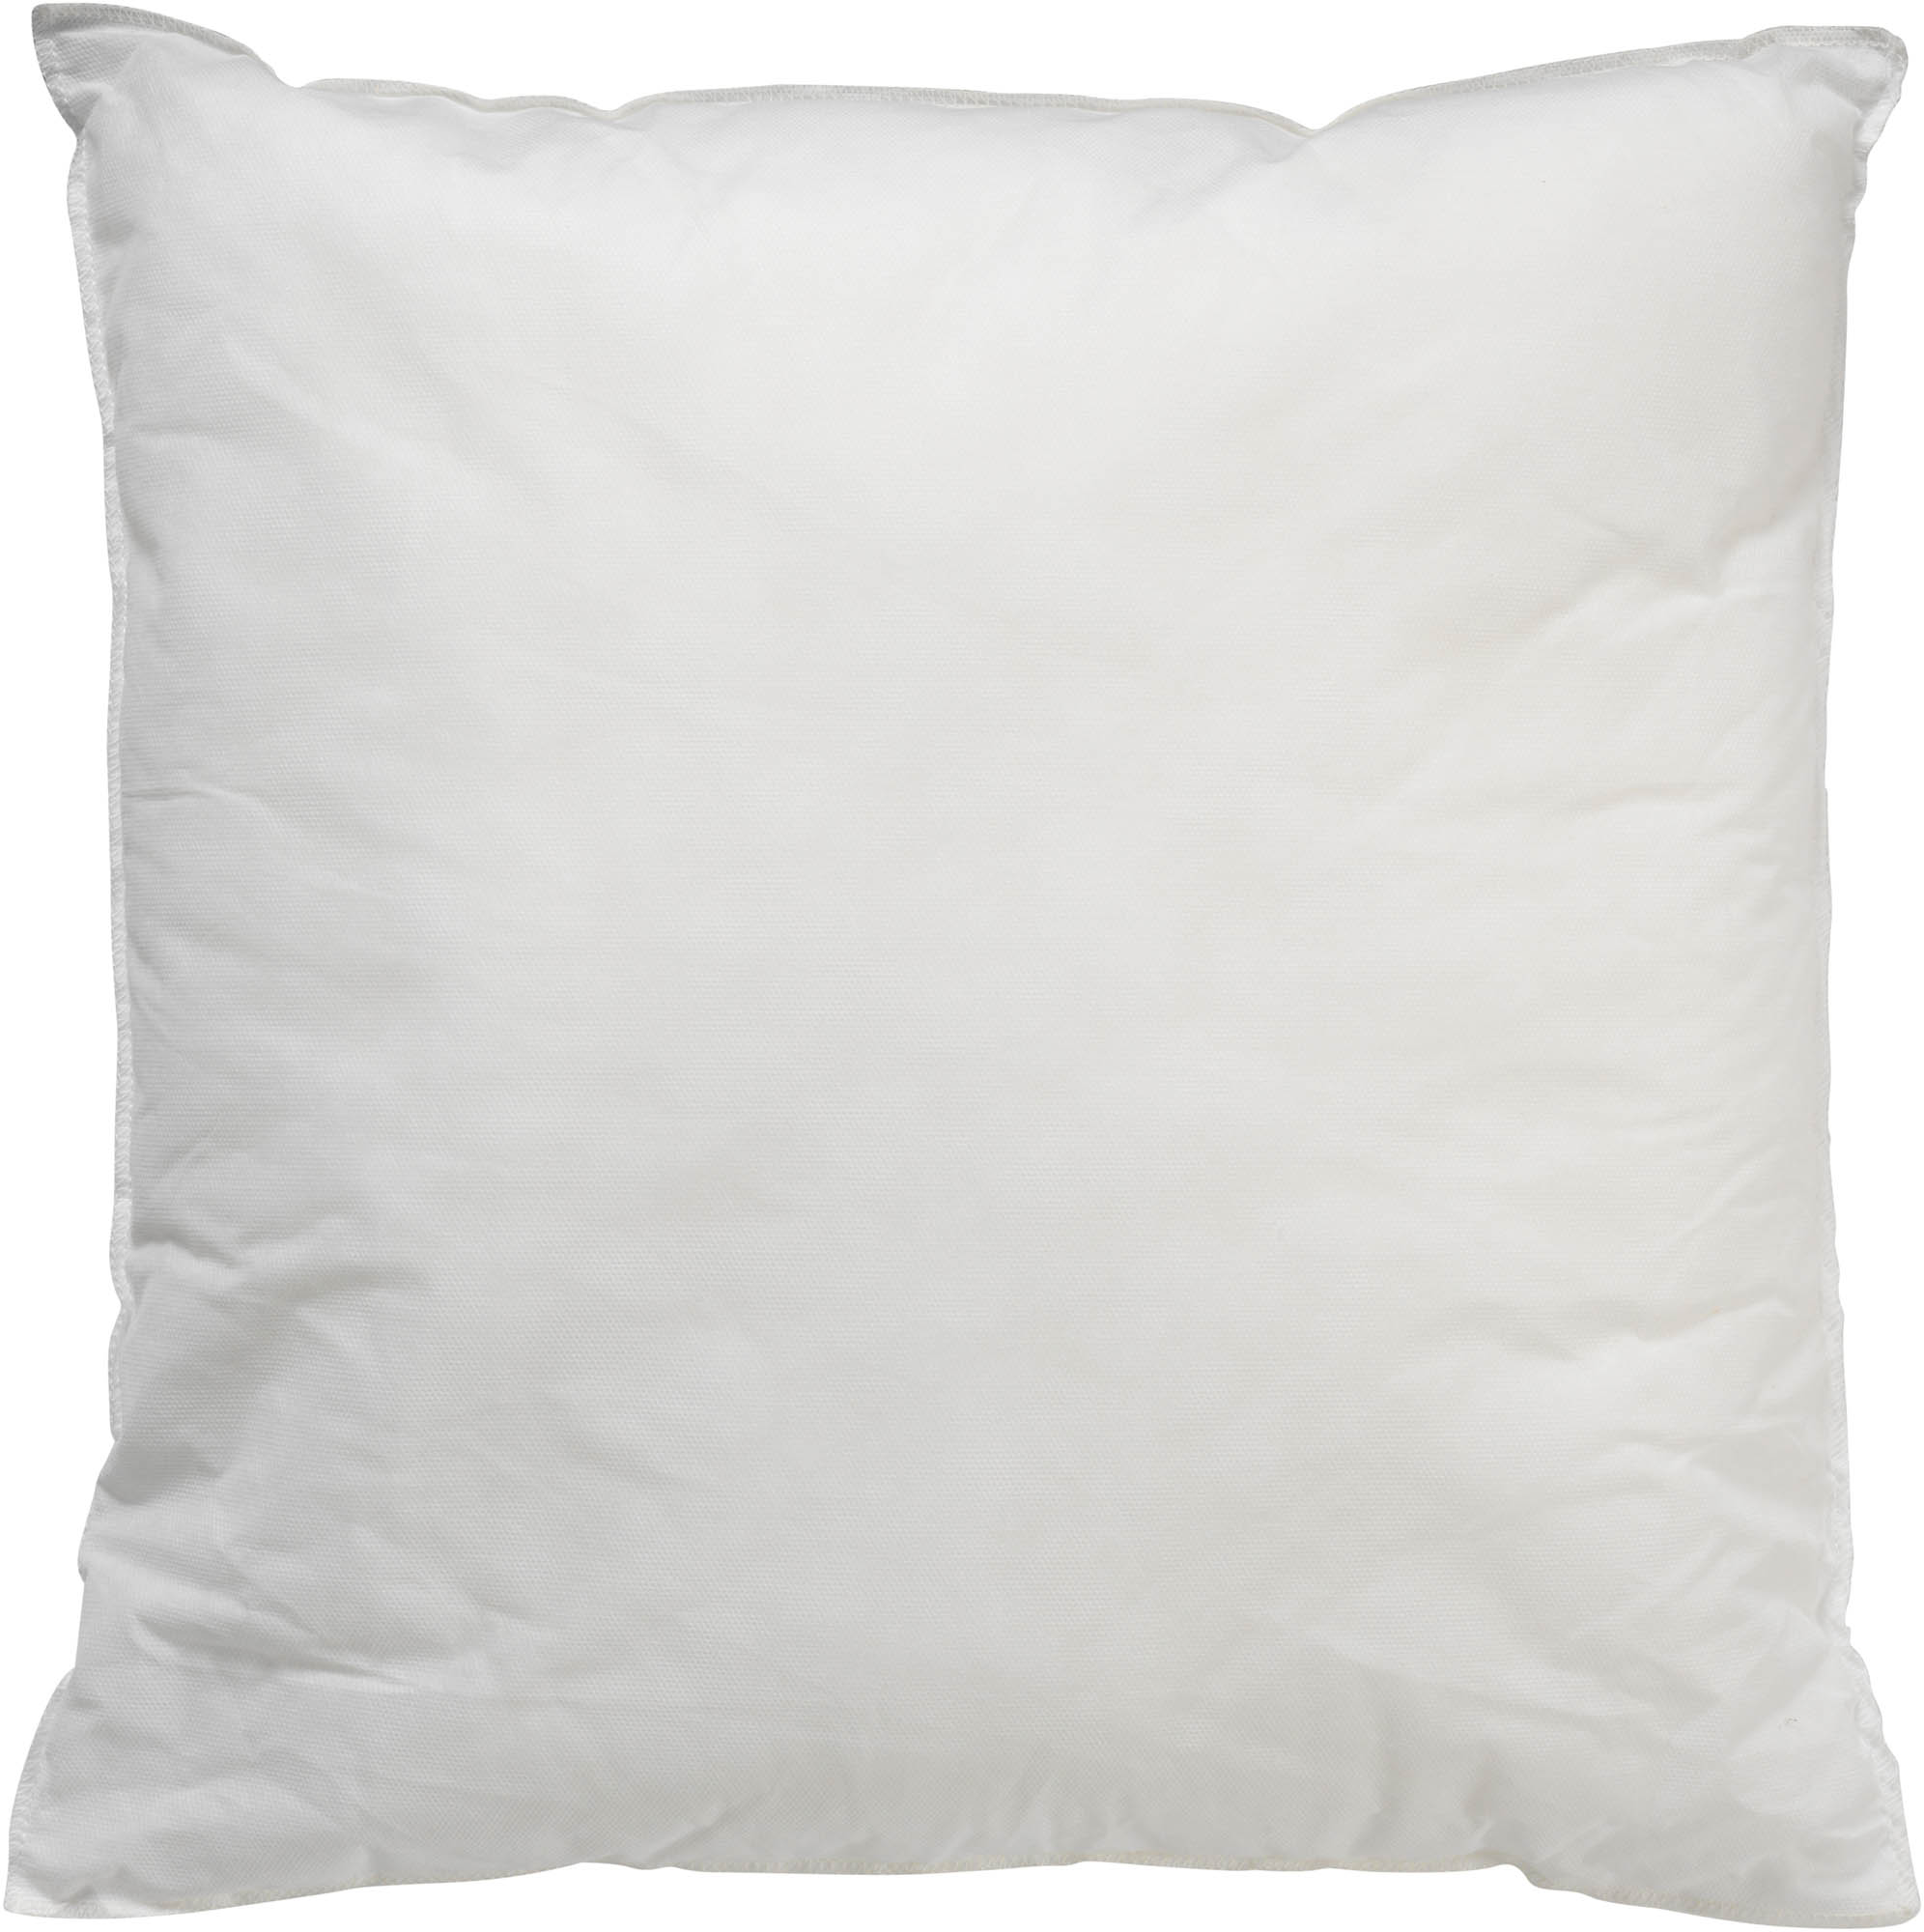 Inner cushion 40x40 cm With polyester | 40x40 |